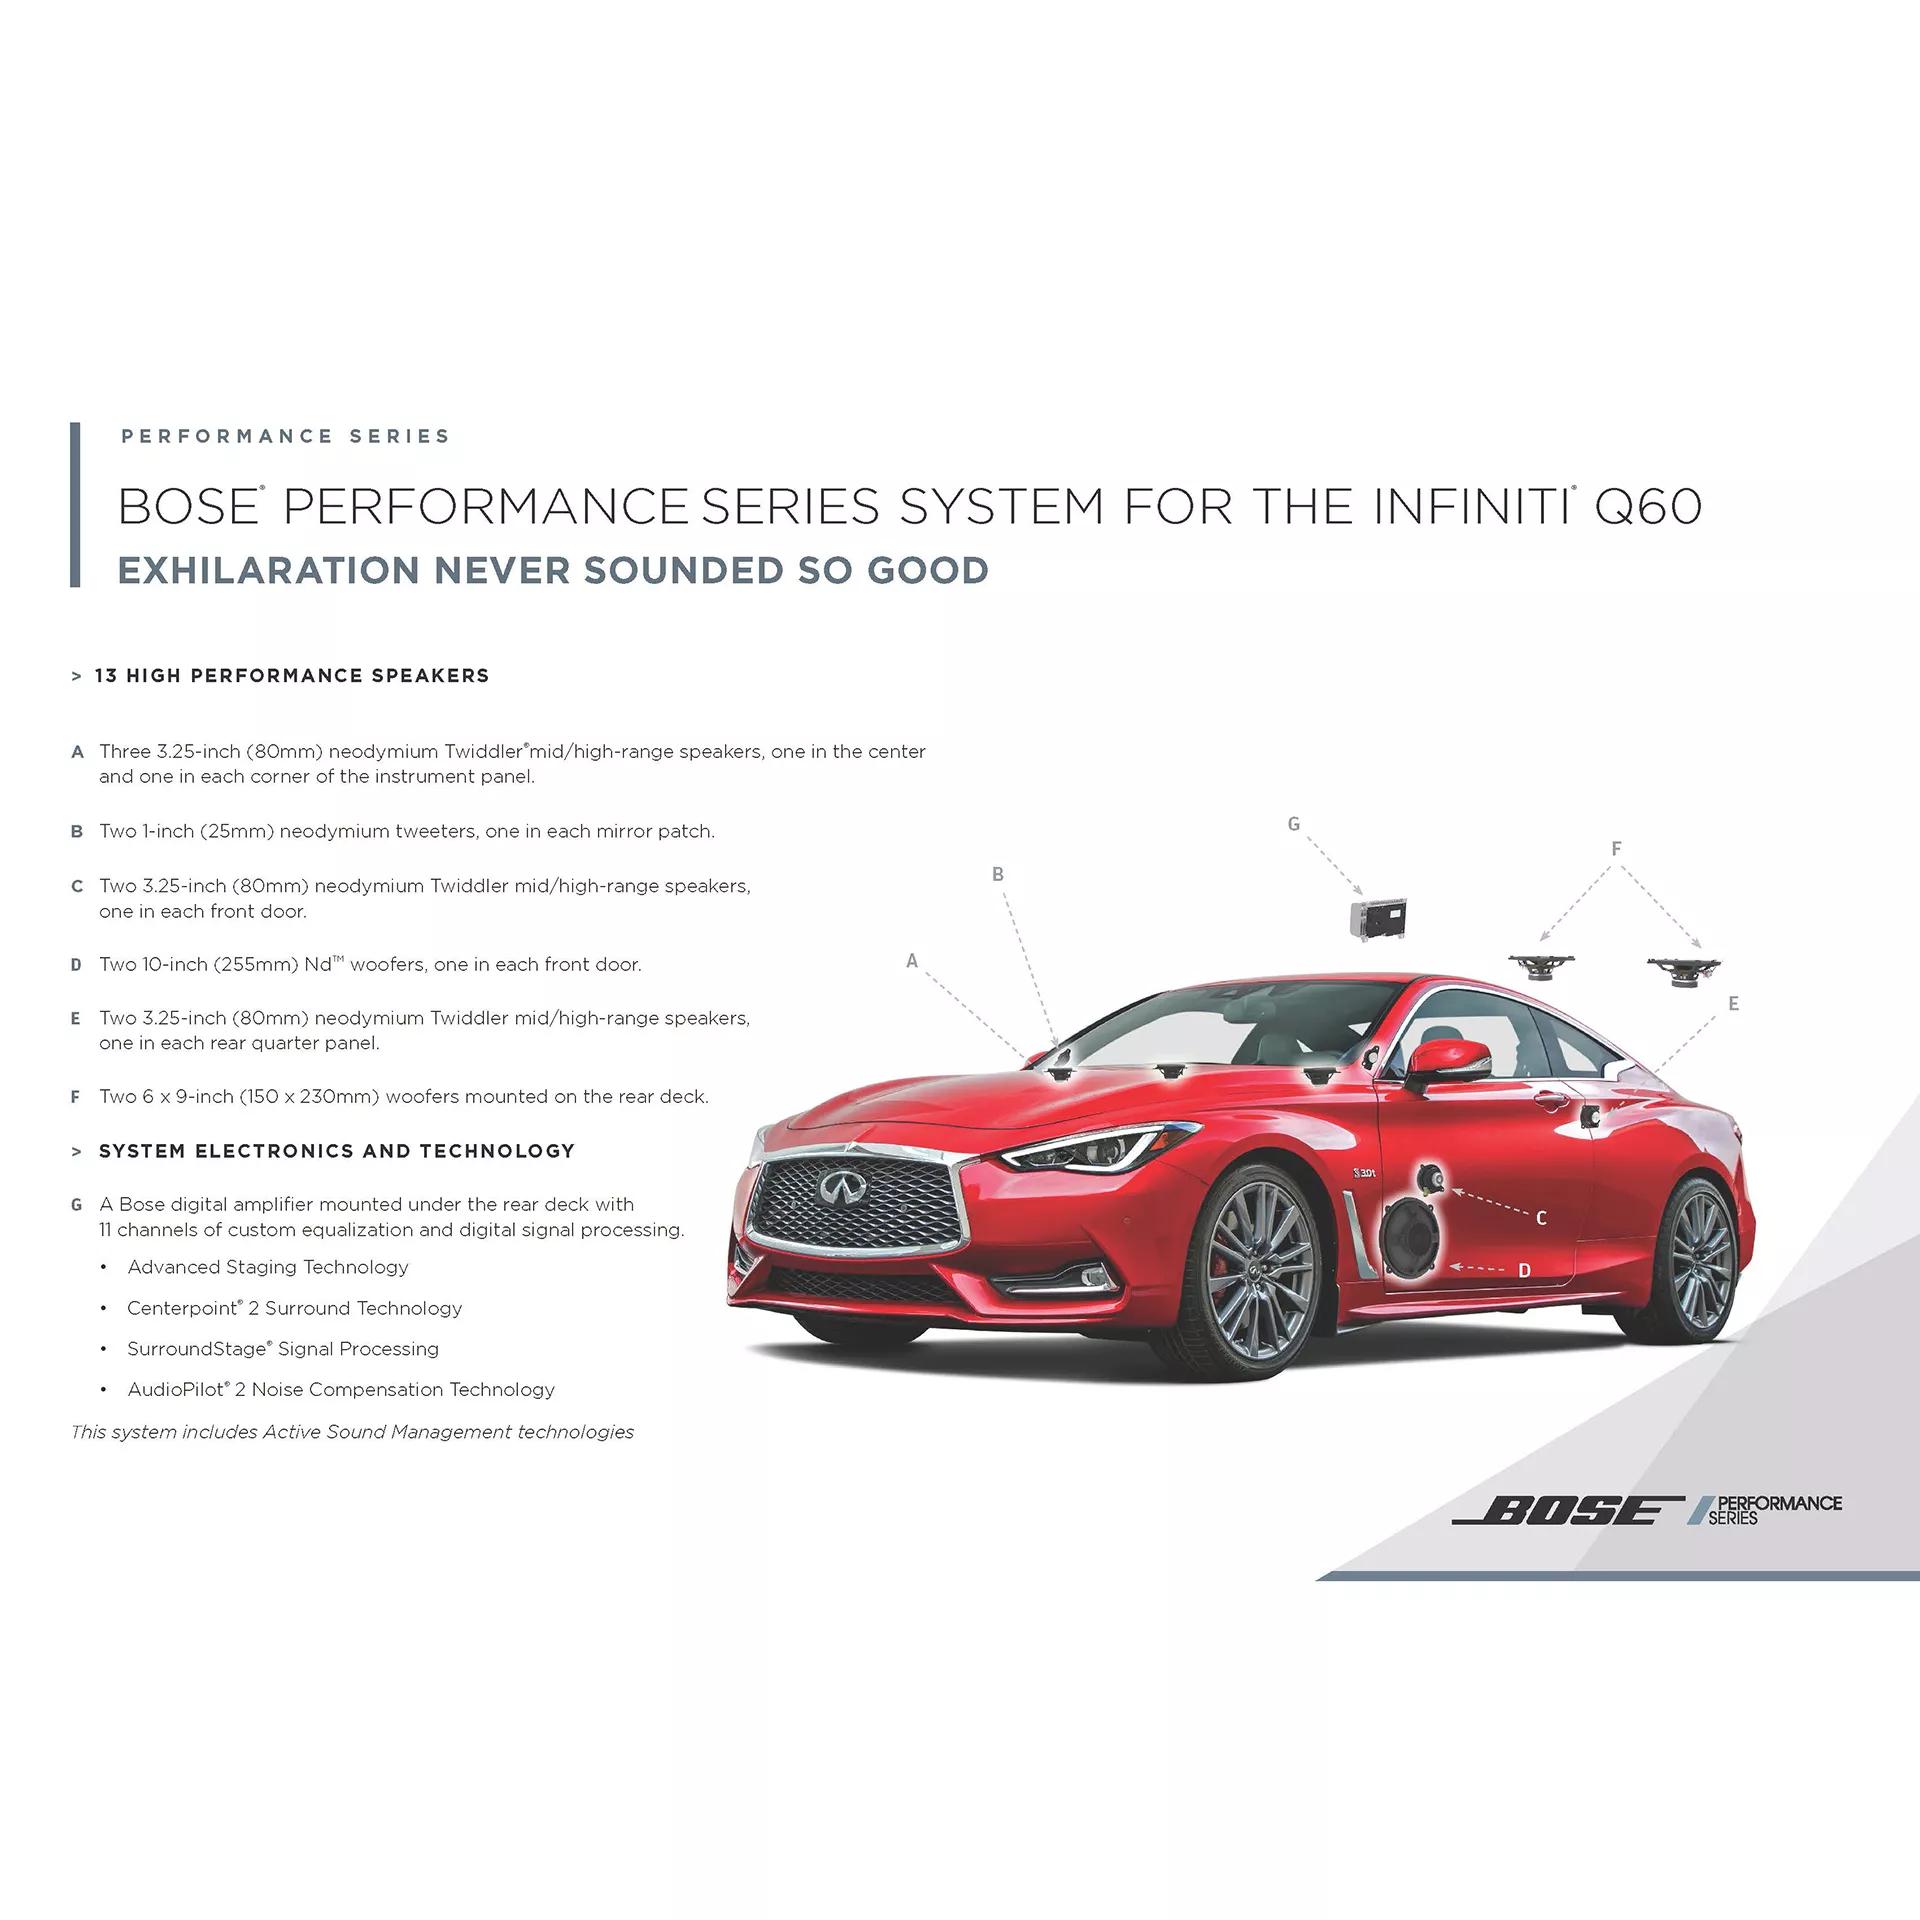 The Bose Performance Series sound system for the 2017 Infiniti Q60